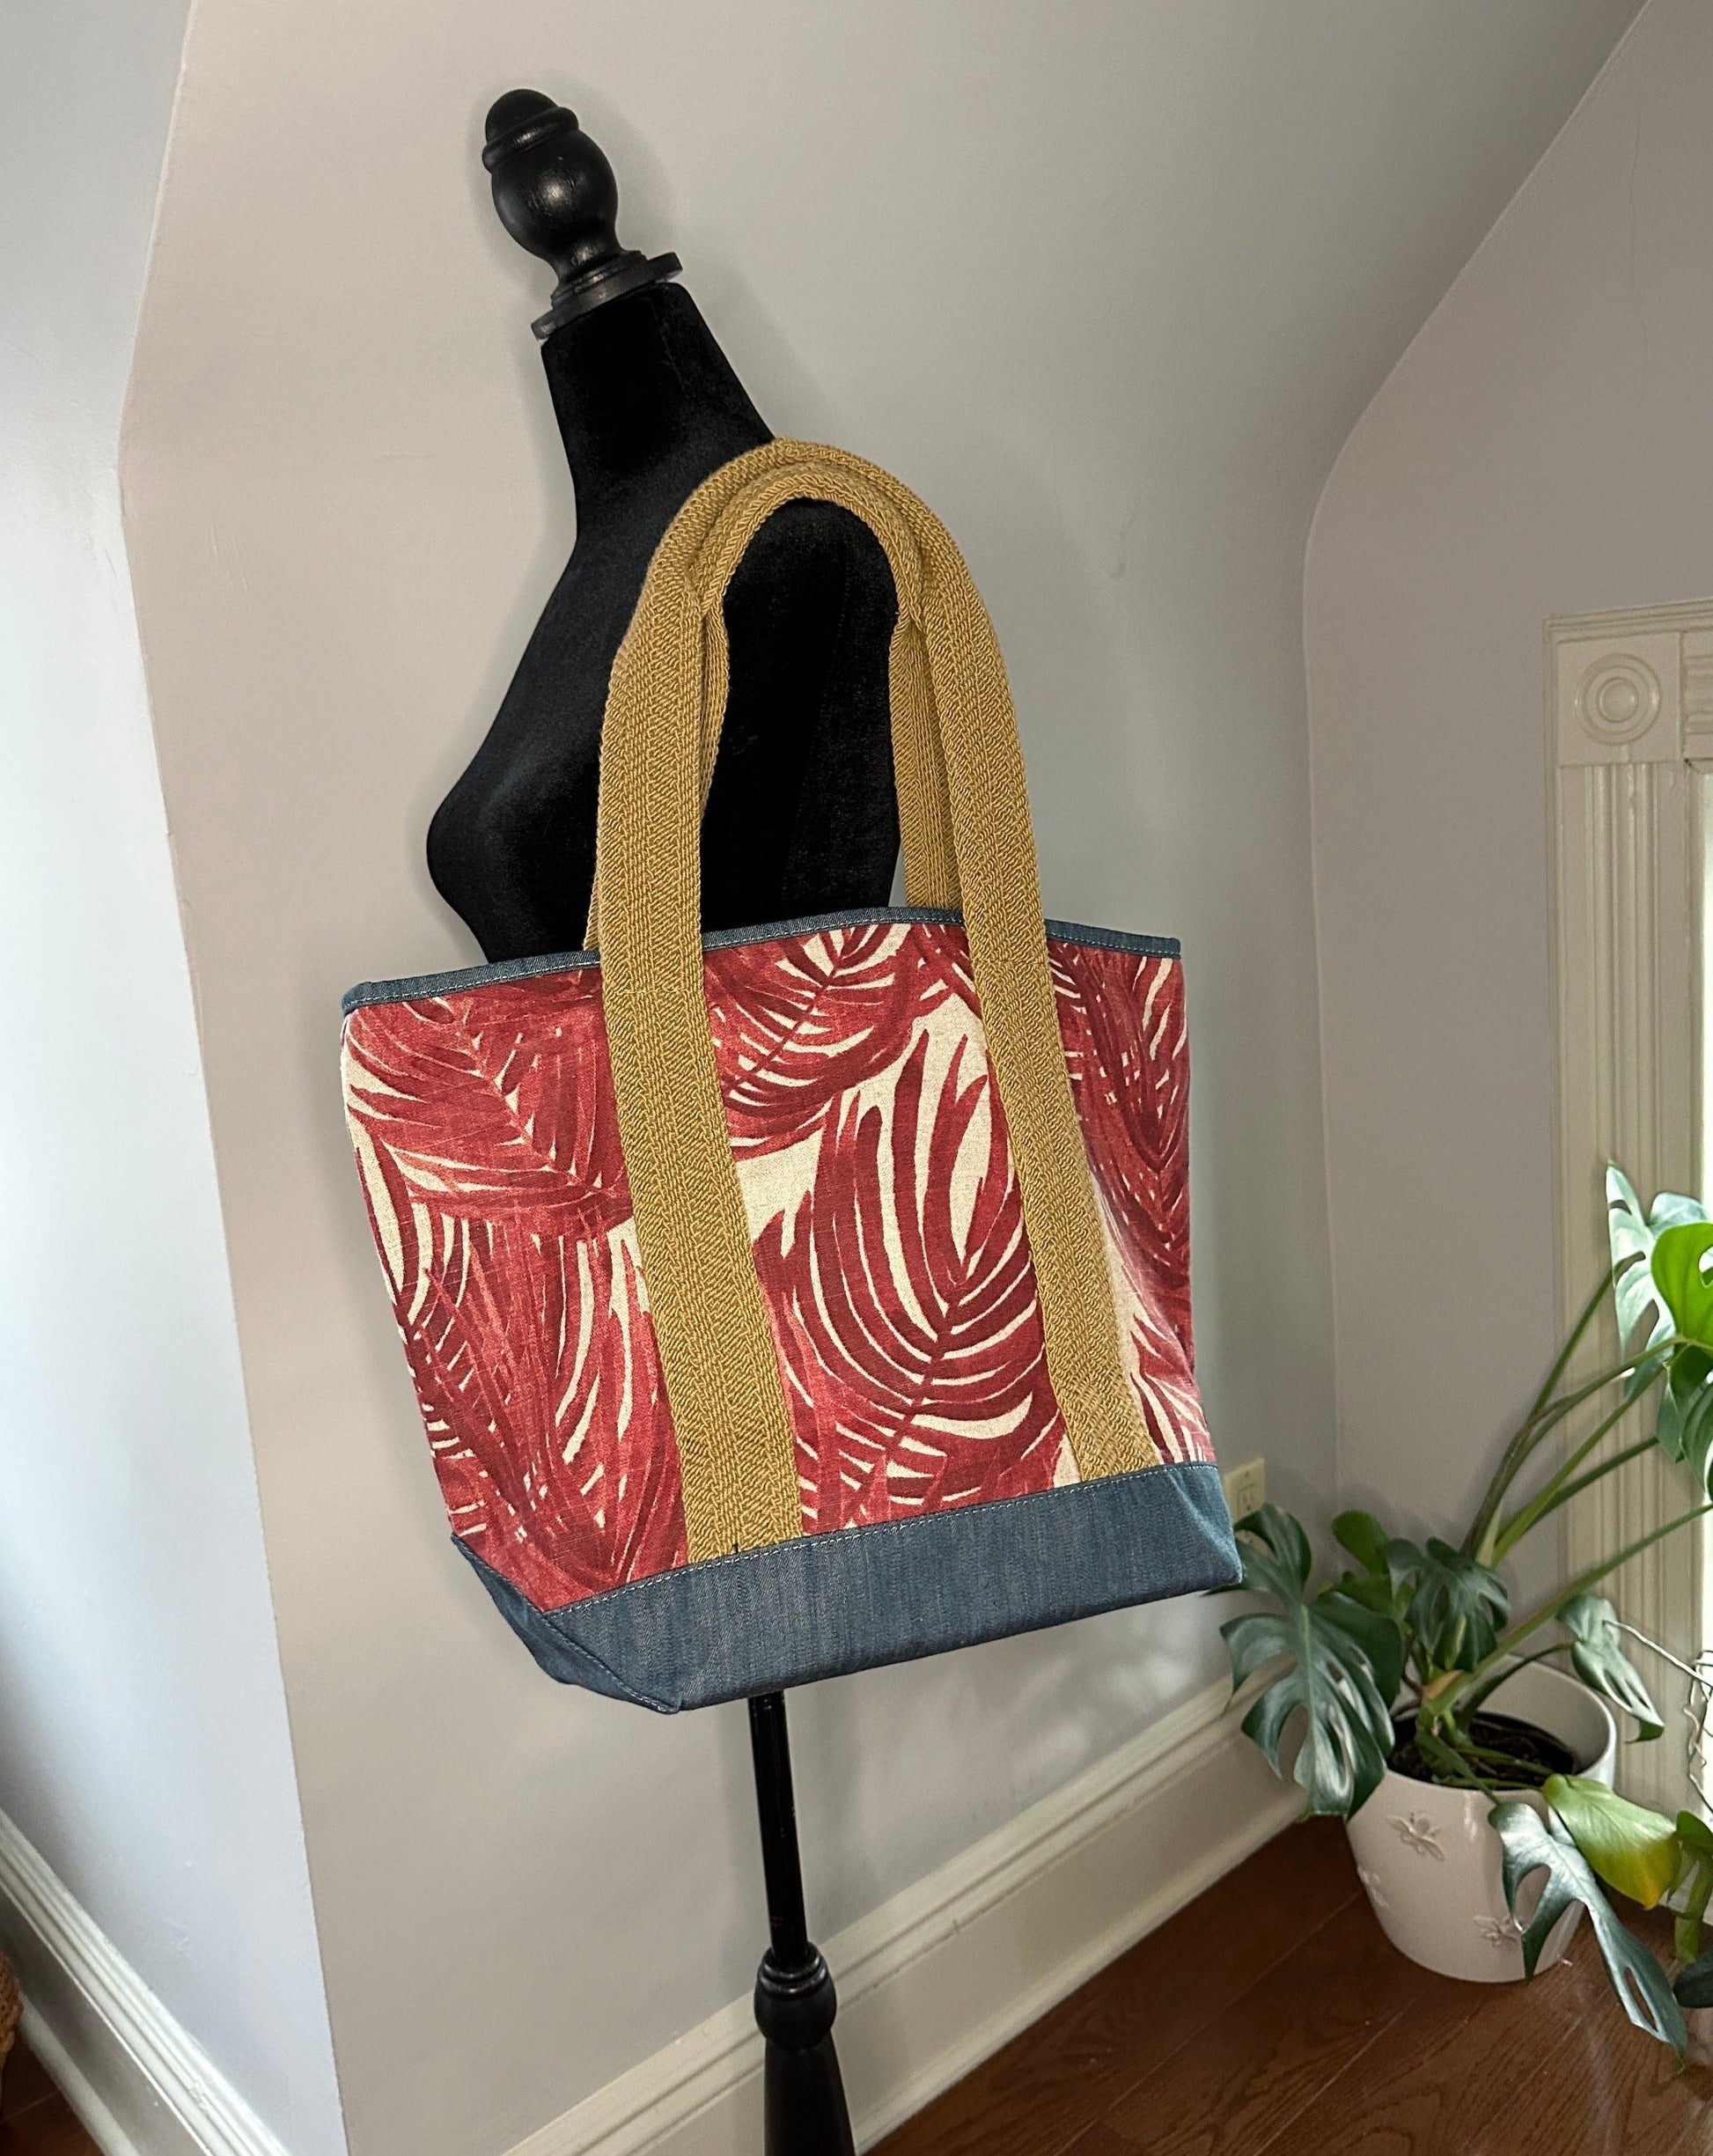 Large tote essential tote for your everyday needs.